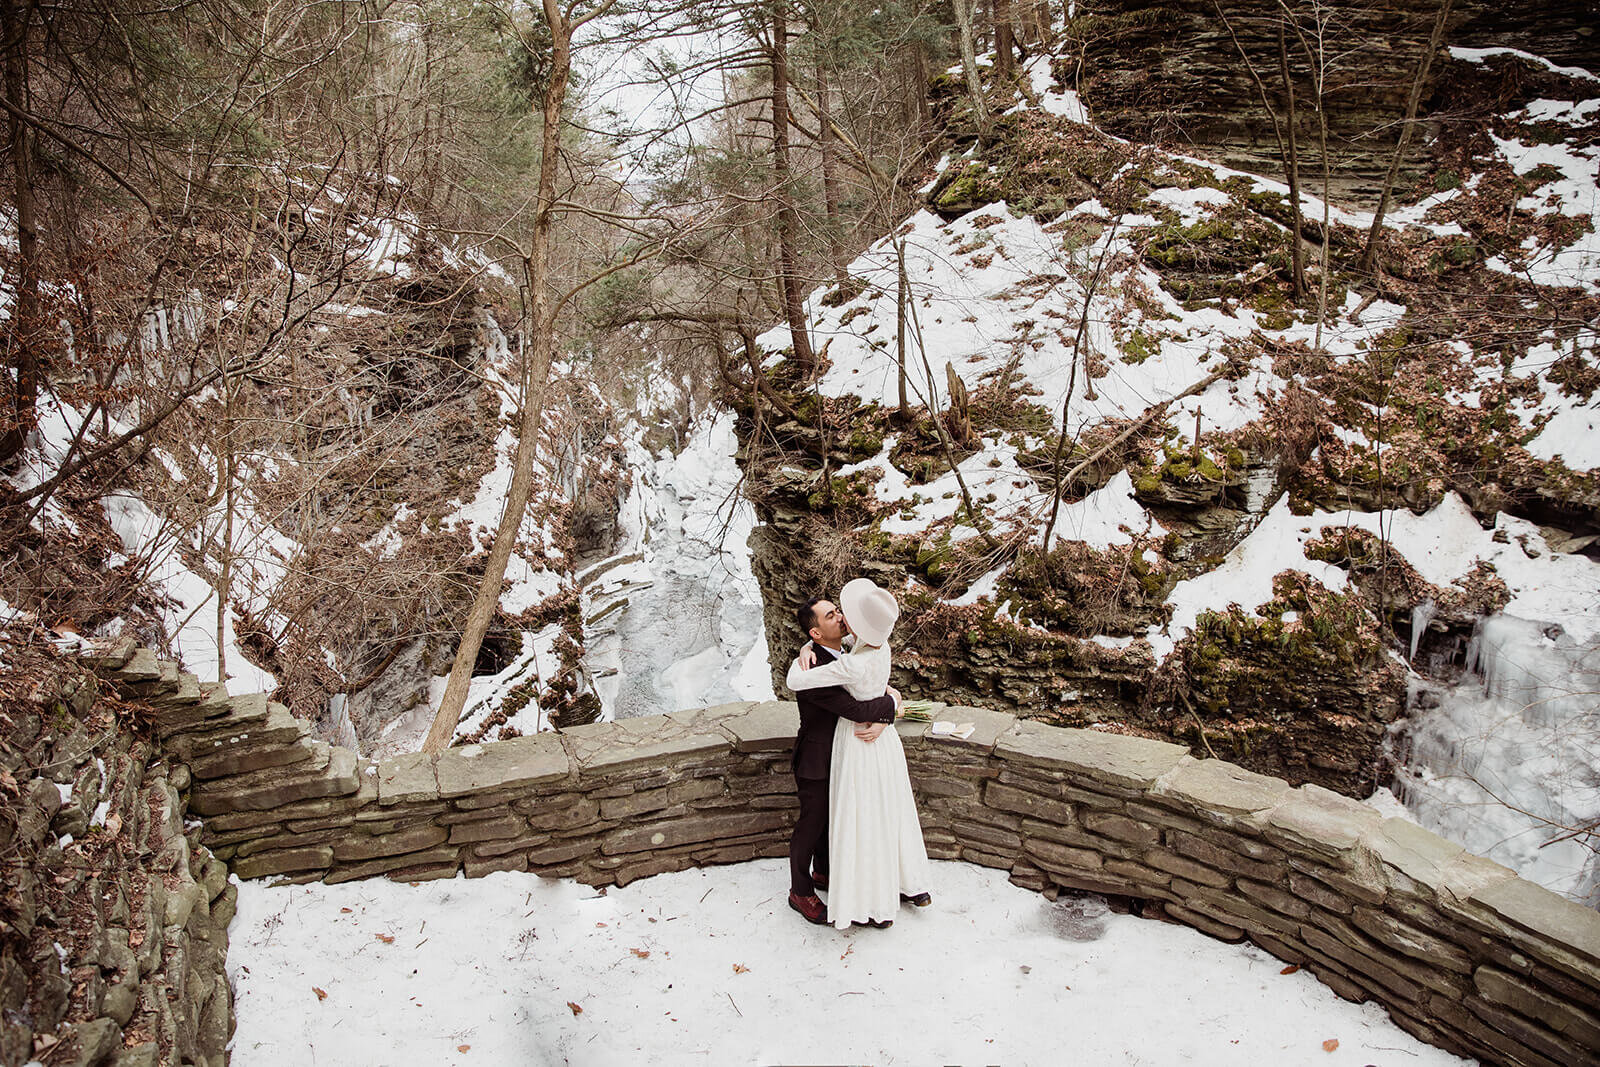  Stylish NYC couple elope late winter in the Finger Lakes region of Upstate NY. Couple exchanges vows and rings during ceremony. 